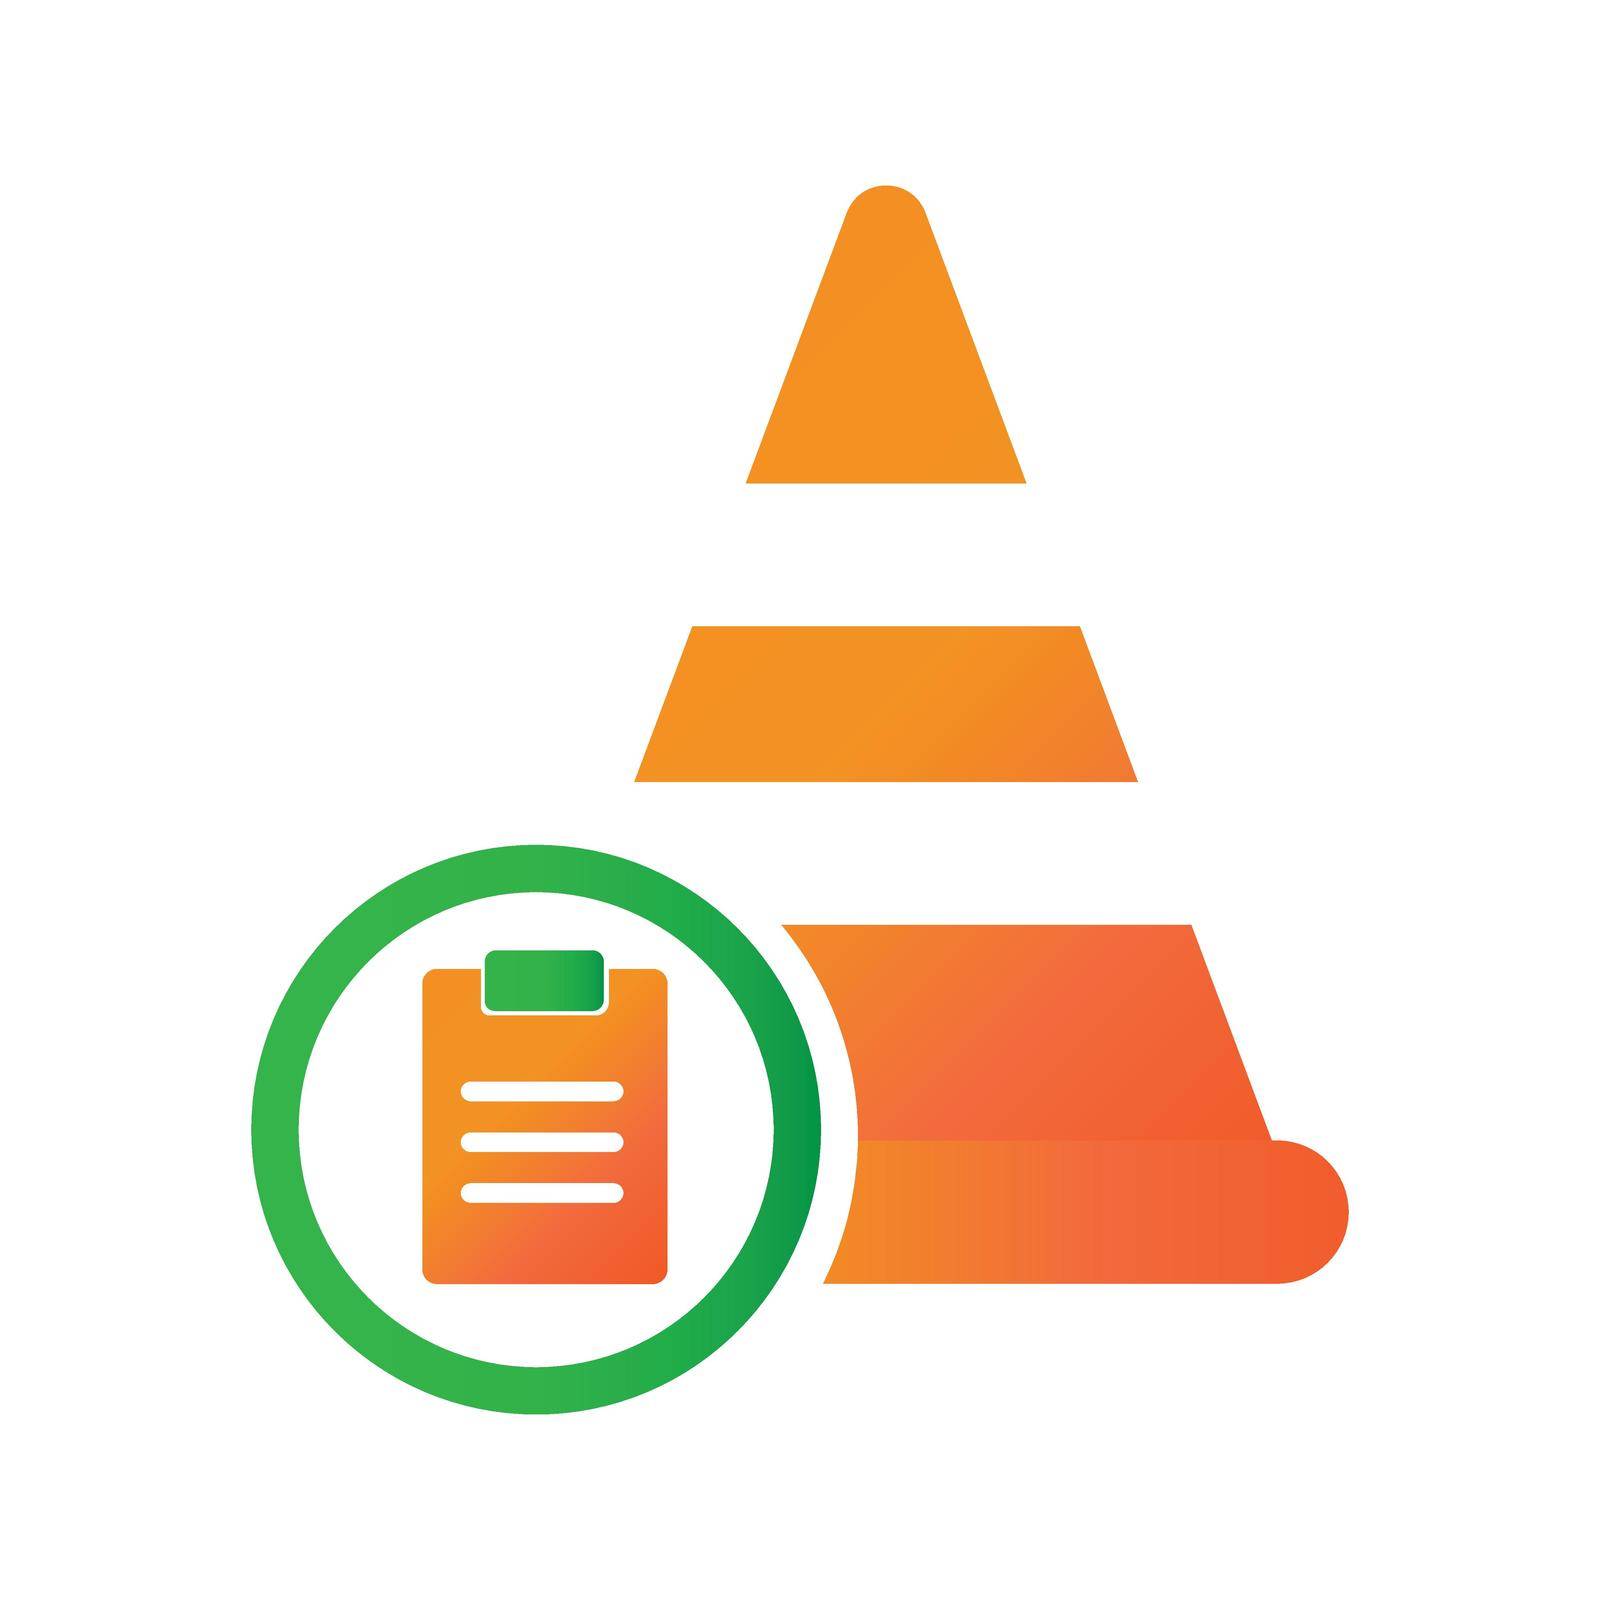 training cone progress report illlustration design. training cone progress report icon isolated on white background. ready use vector. by sekitarief